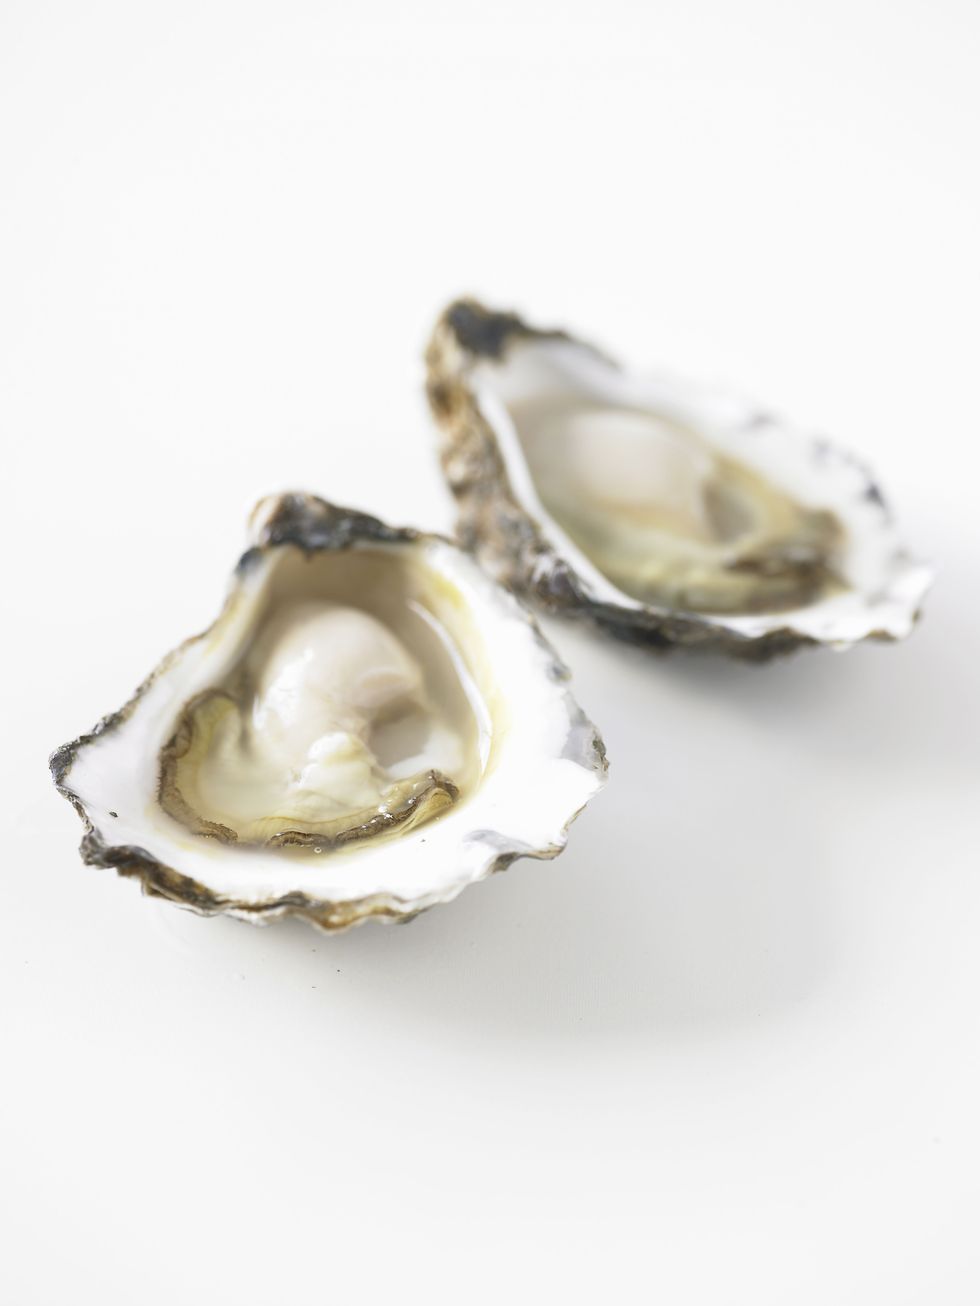 Oyster, Bivalve, Natural material, Shell, Shellfish, Seafood, Molluscs, Abalone, Clam, Delicacy, 